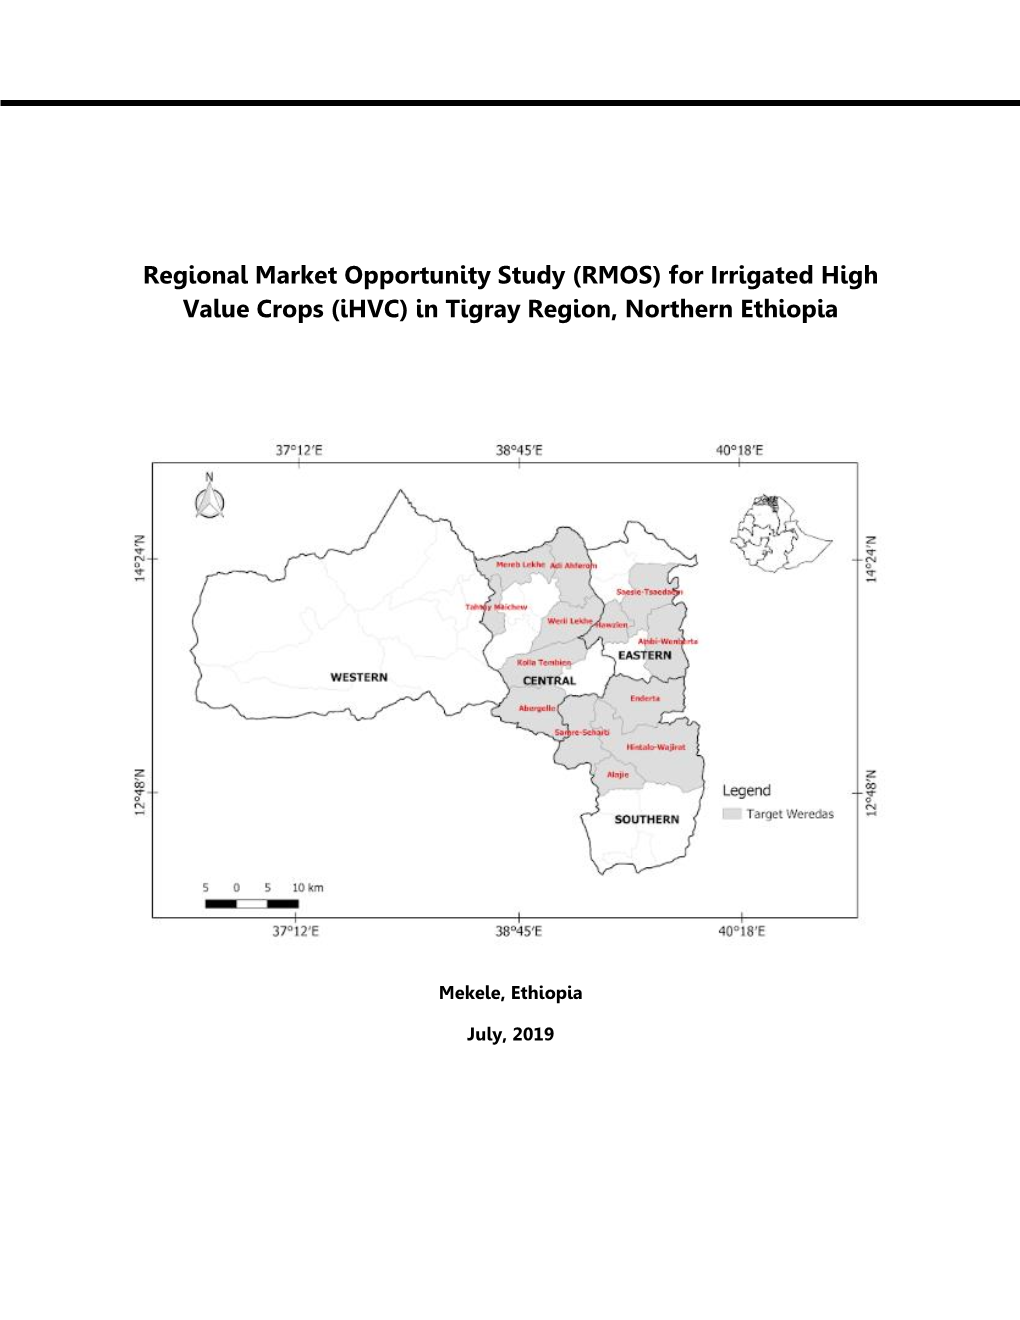 (RMOS) for Irrigated High Value Crops (Ihvc) in Tigray Region, Northern Ethiopia